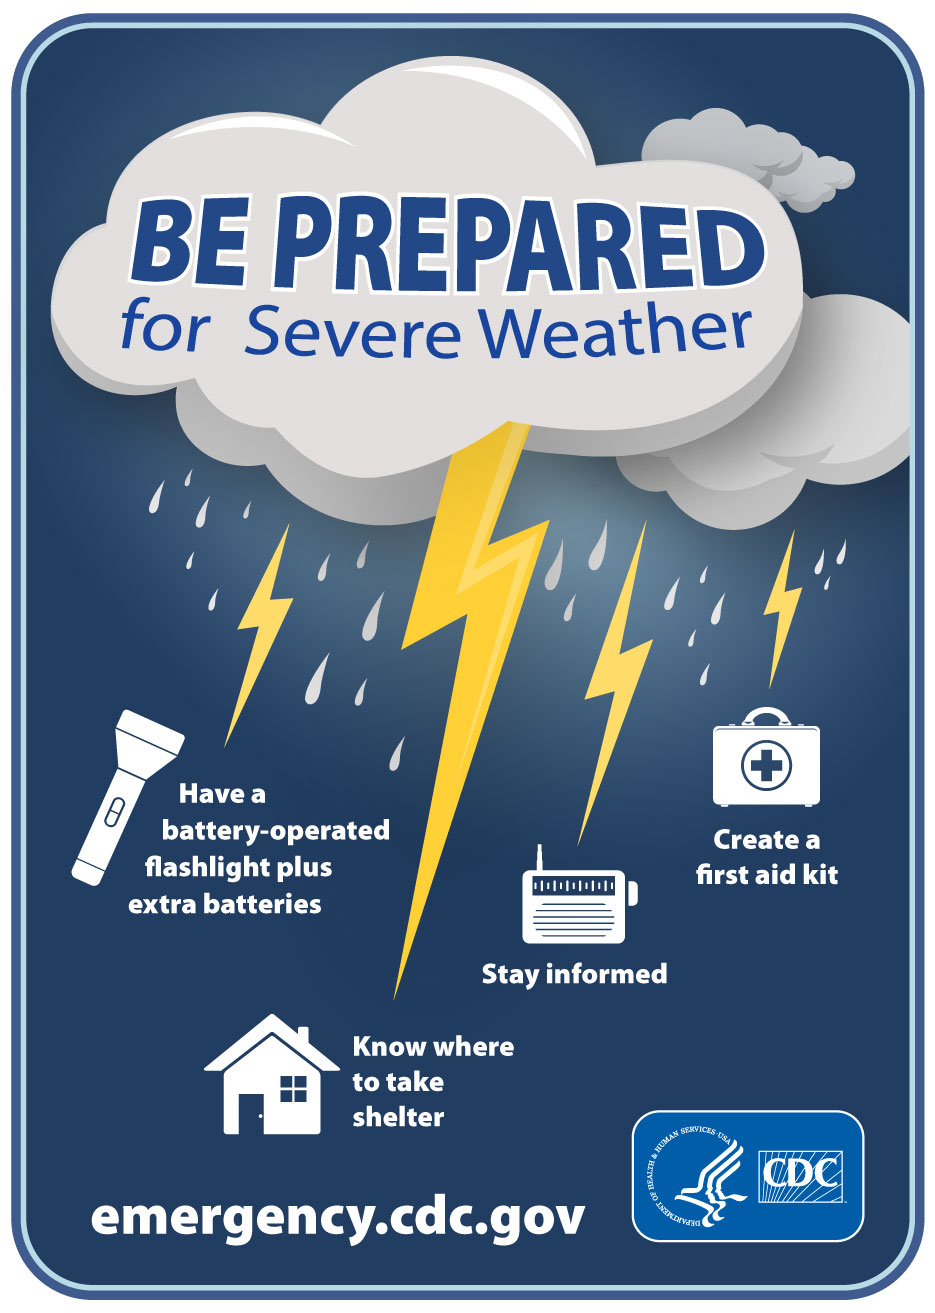 be prepared for severe weather infographic